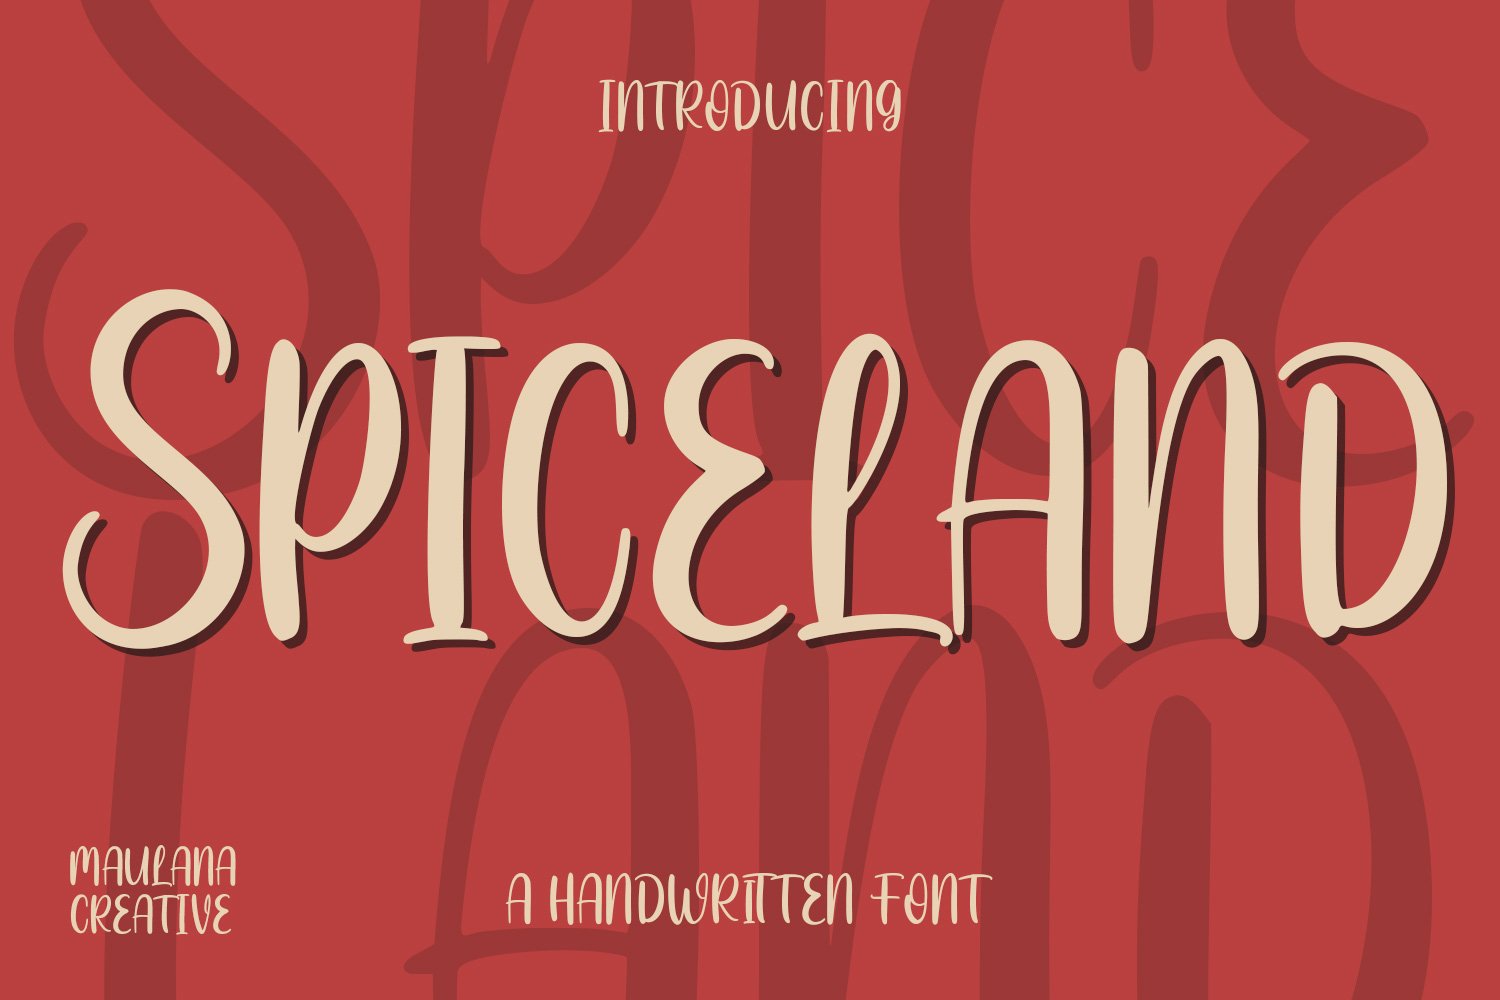 Spiceland Handwritten Display Font cover image.